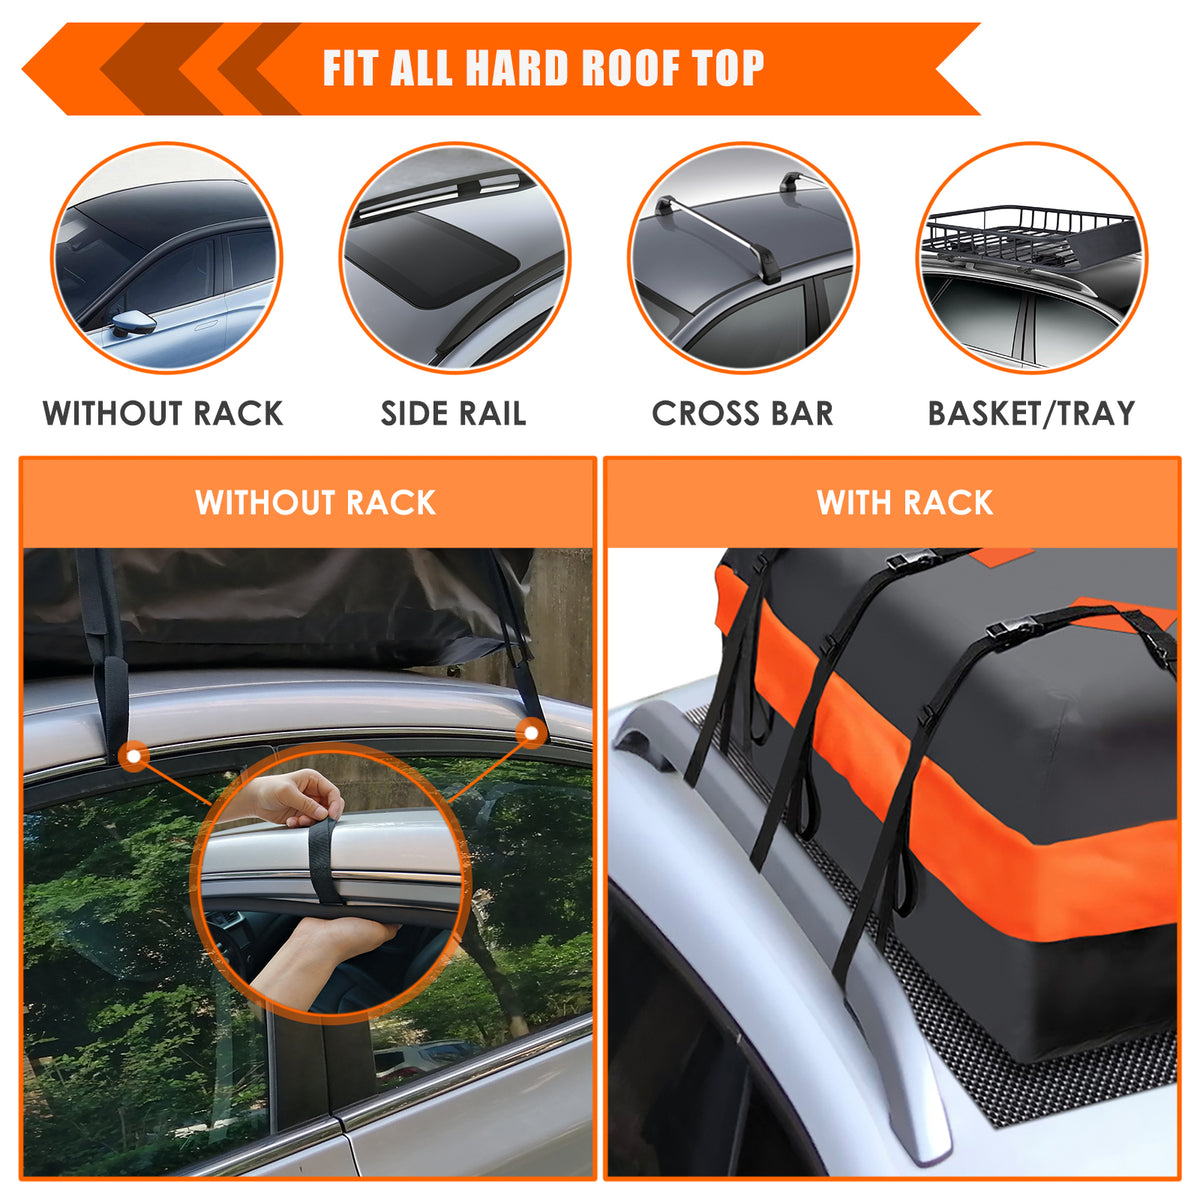 MeeFar Universal Roof Top Cargo Carrier 15 OR 20 Cubic Feet Waterproof Bag  Luggage Holder for All Car SUV with/without Rack